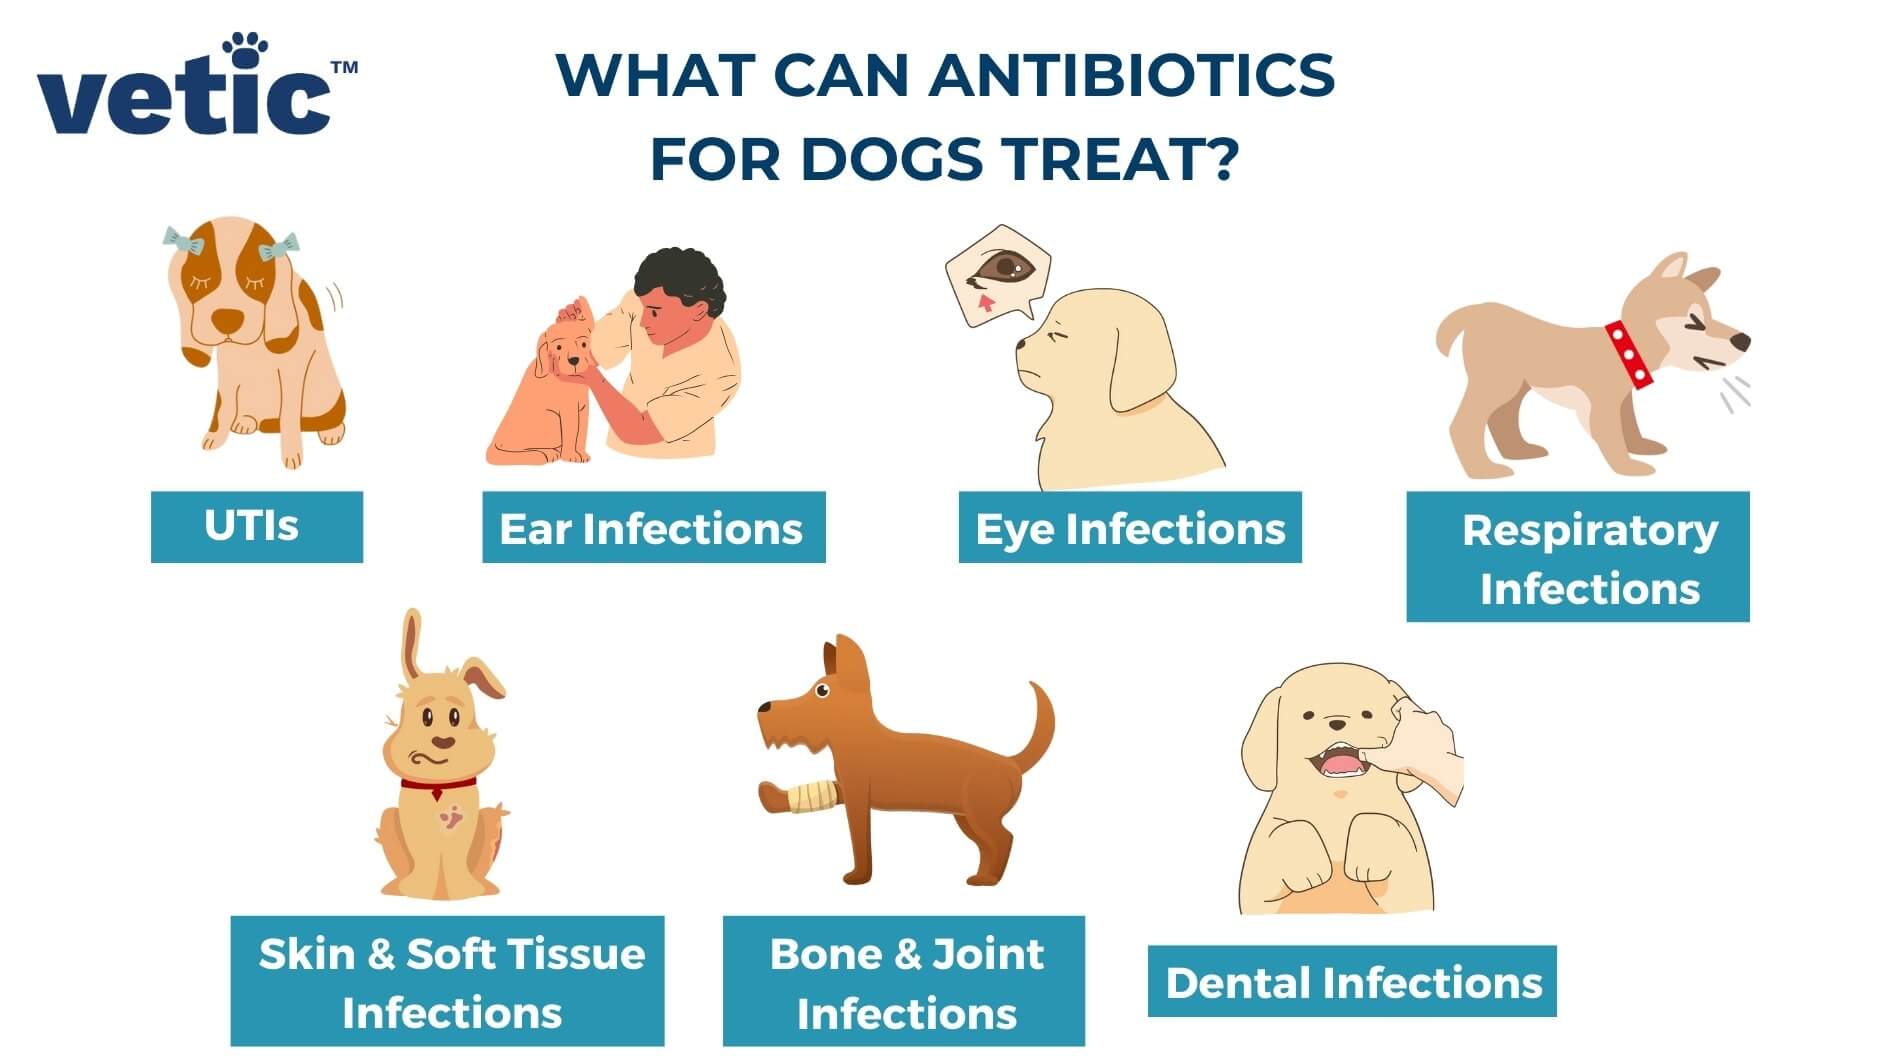 Antibiotics for Dogs: Uses, Safety, Side Effects and More